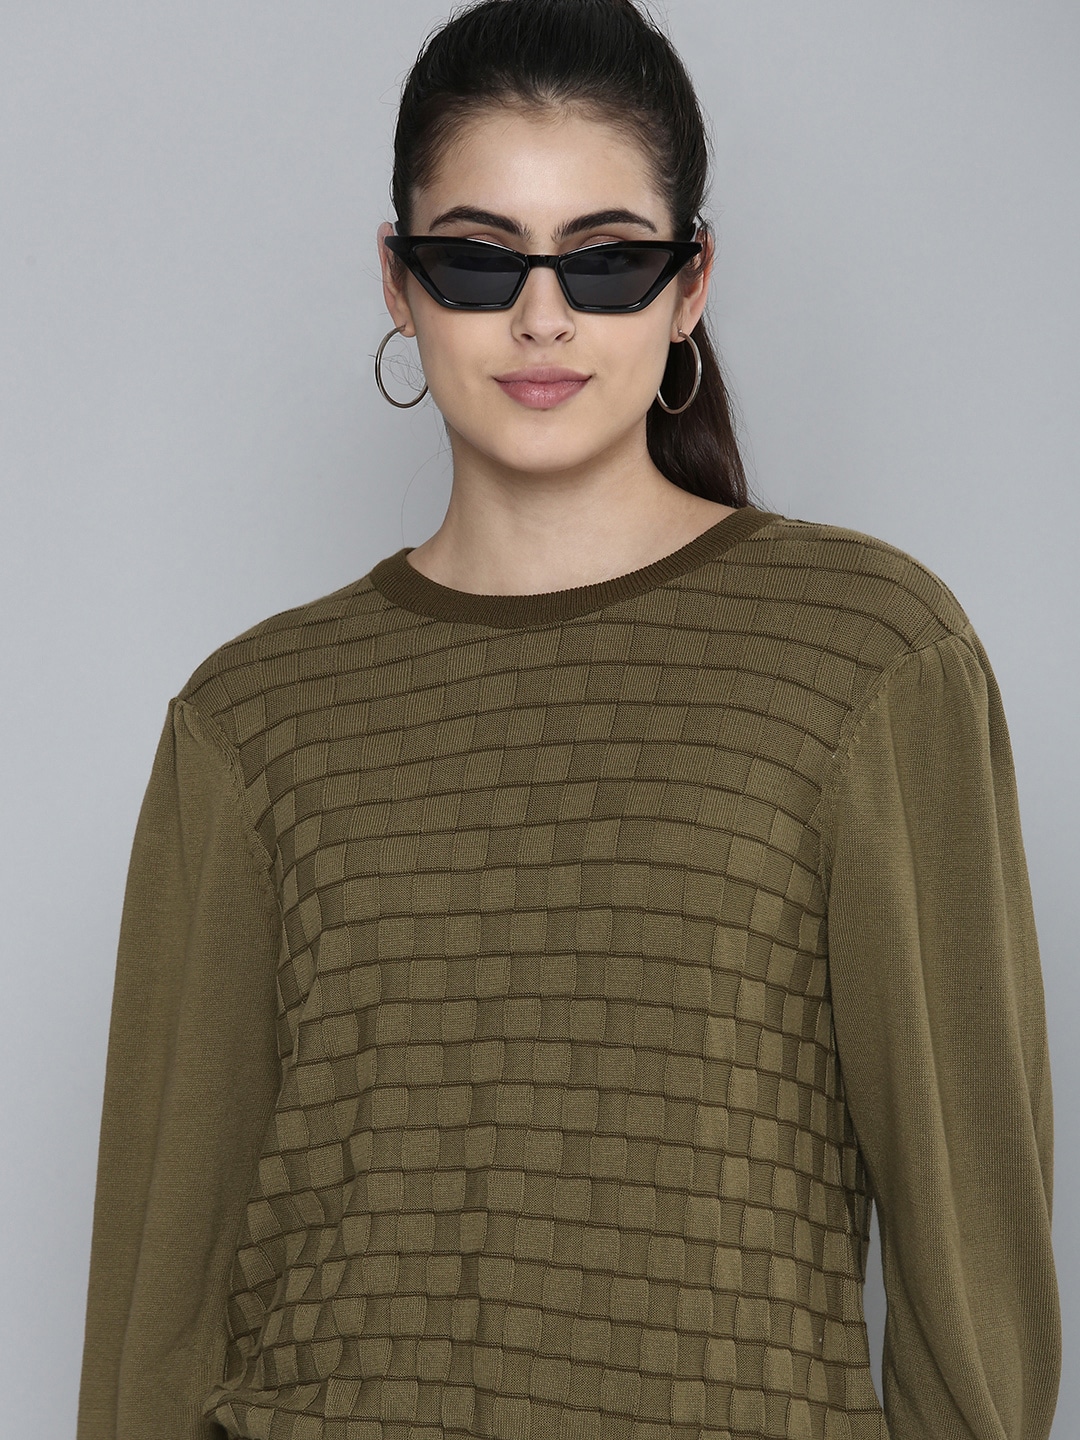 Levis Women Olive Green Checked Sweatshirt Price in India